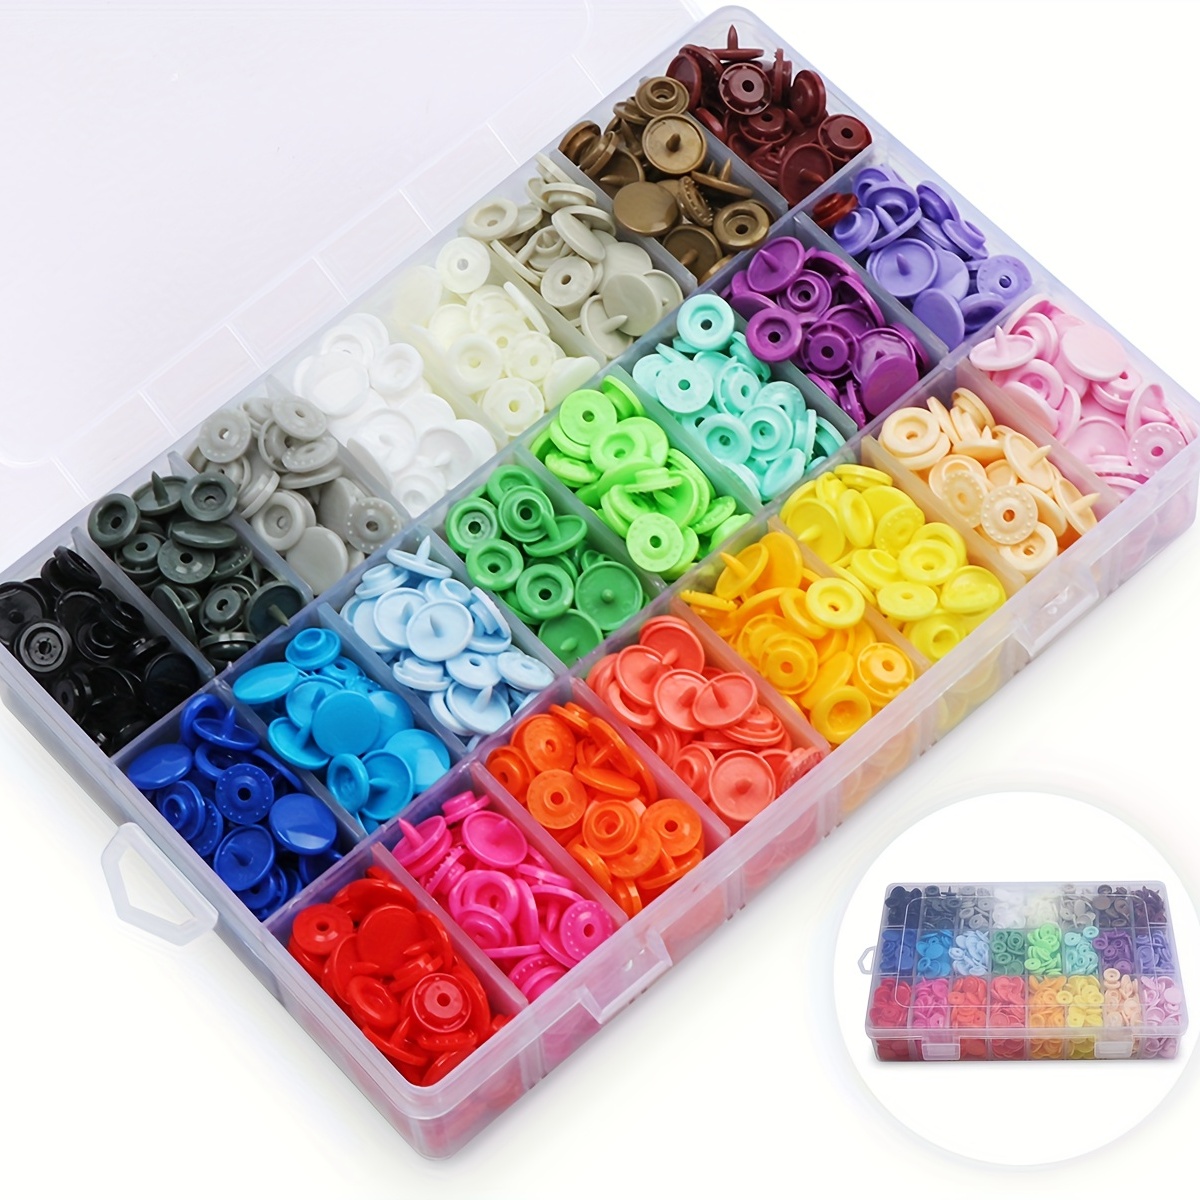 

408 Sets Plastic Snap Buttons, No-sew Snaps With Organizer Storage Case